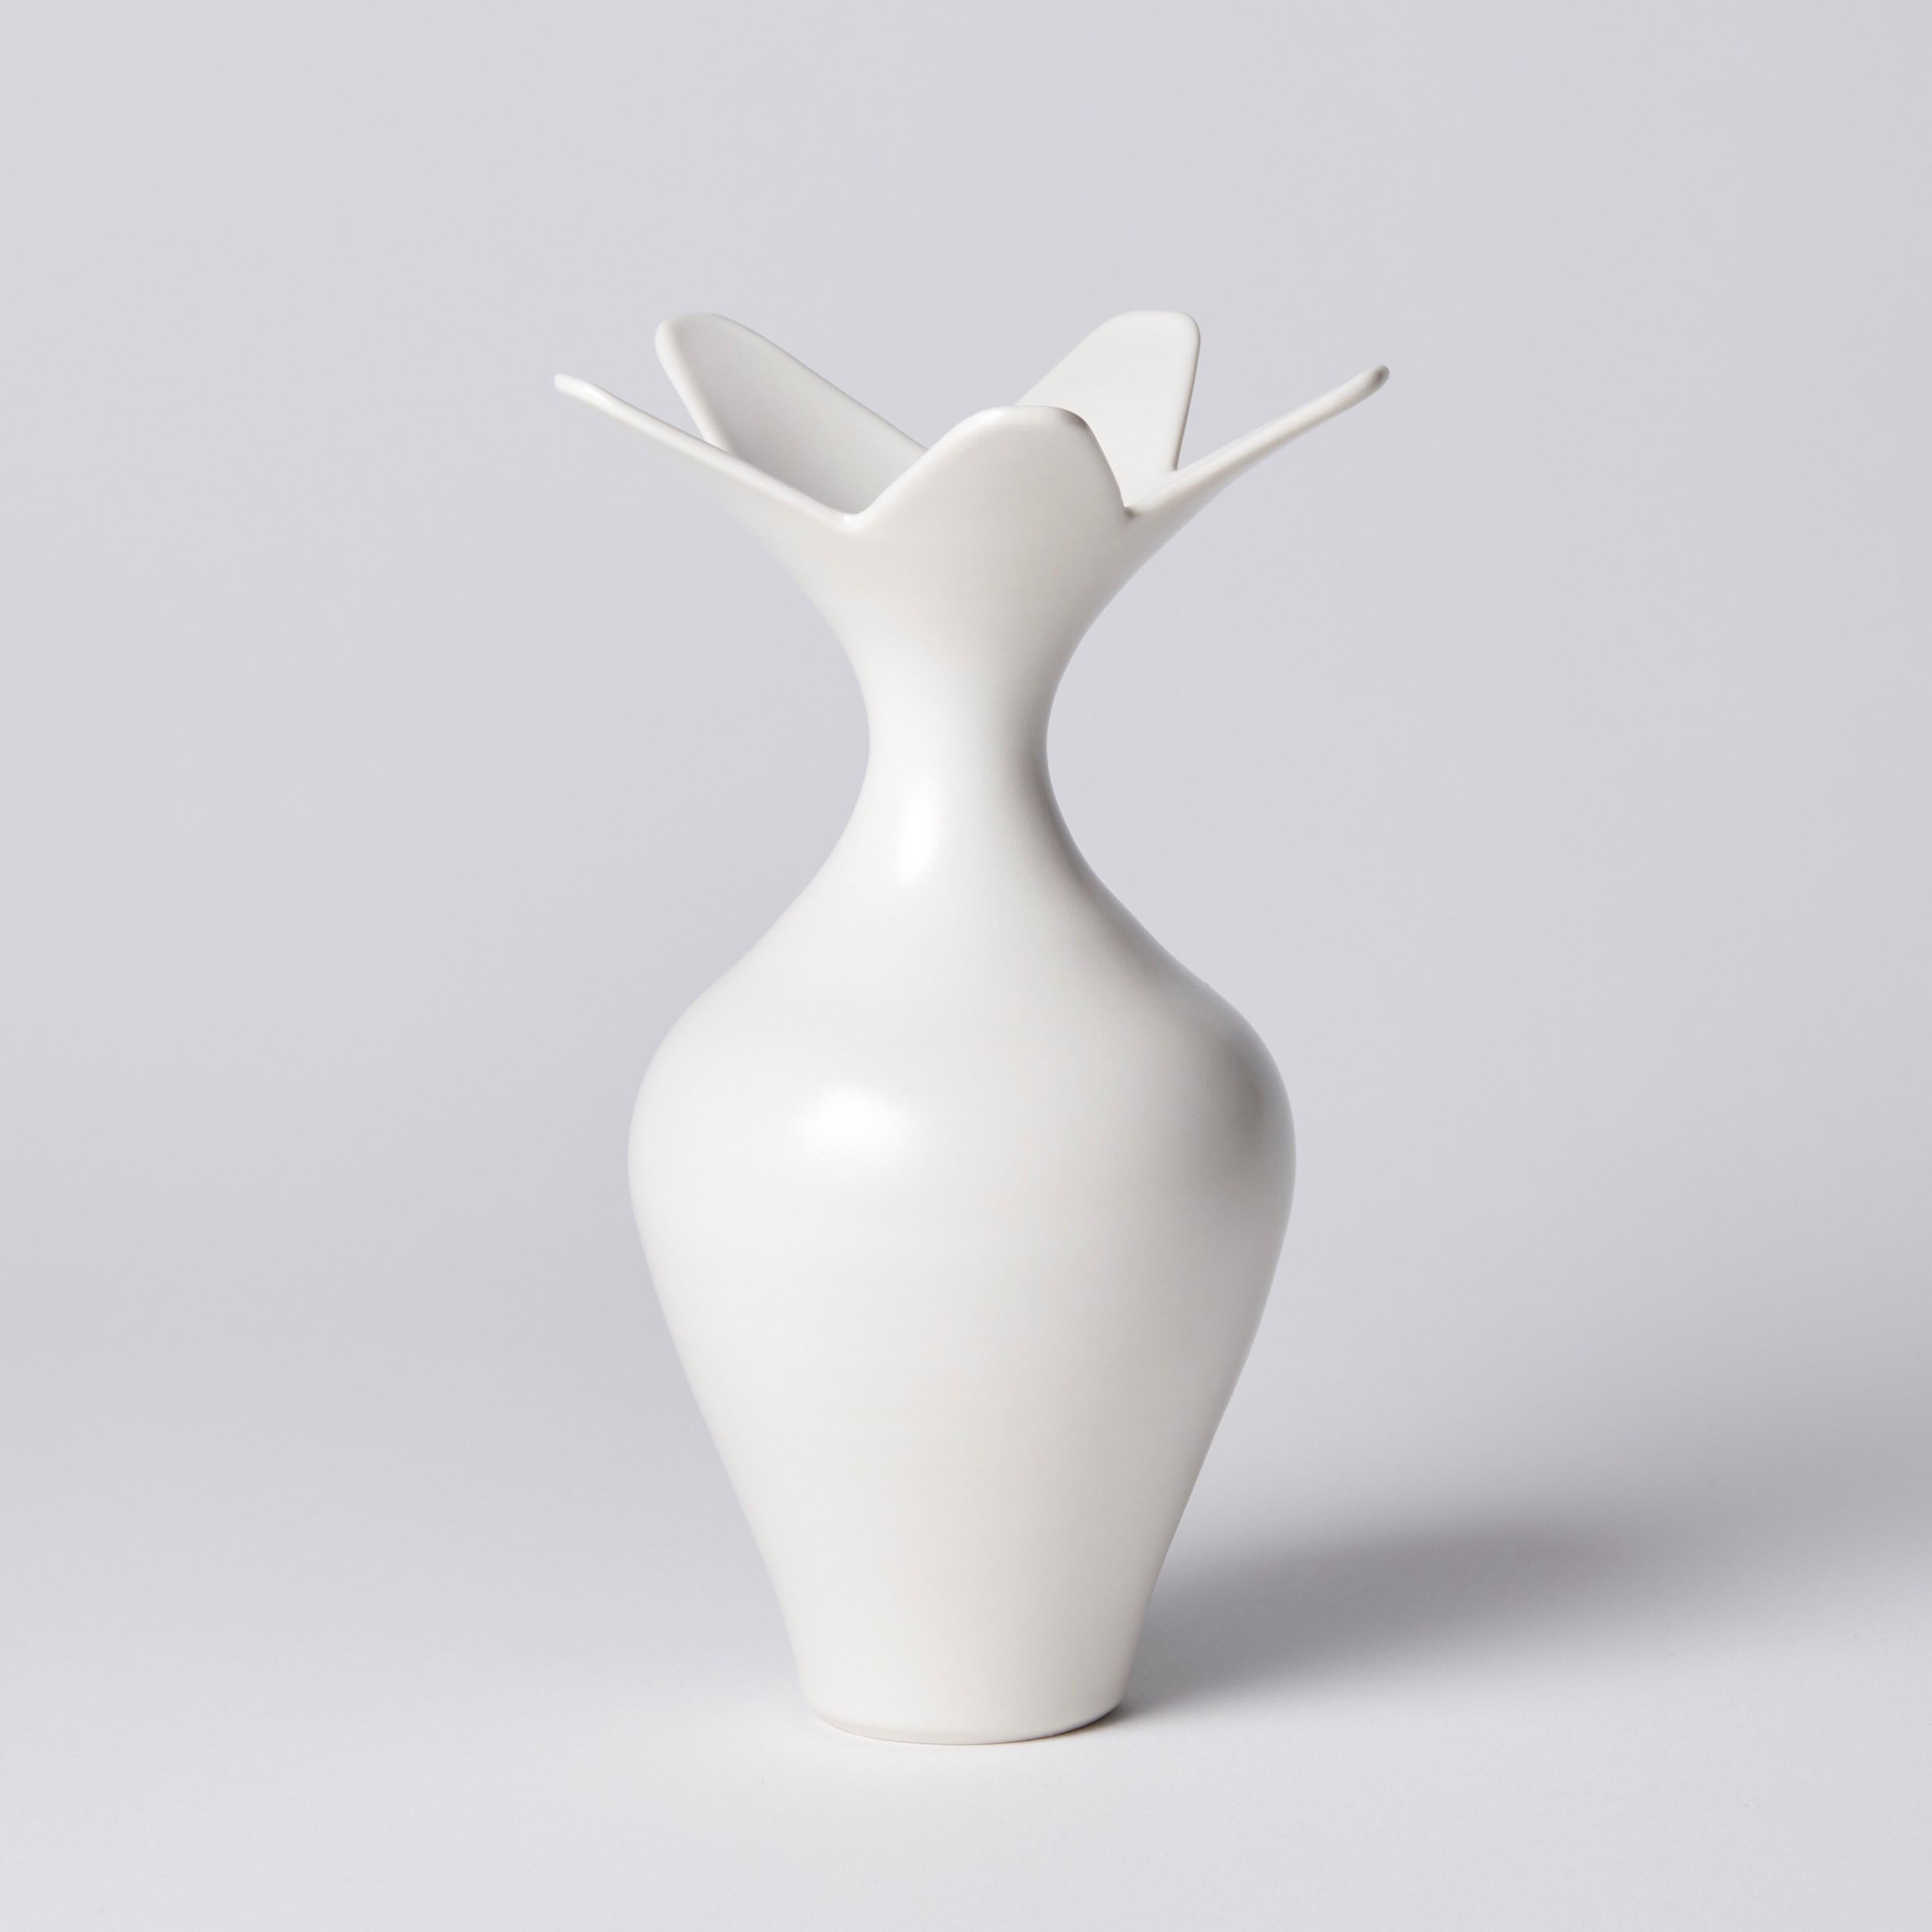 ‘Vase with Star Rim' is a unique porcelain sculptural vessel by the British artist, Vivienne Foley. 

Vivienne Foley is based in Gloucestershire where she produces exquisite ceramic sculpture. Although in essence they are often functional pieces